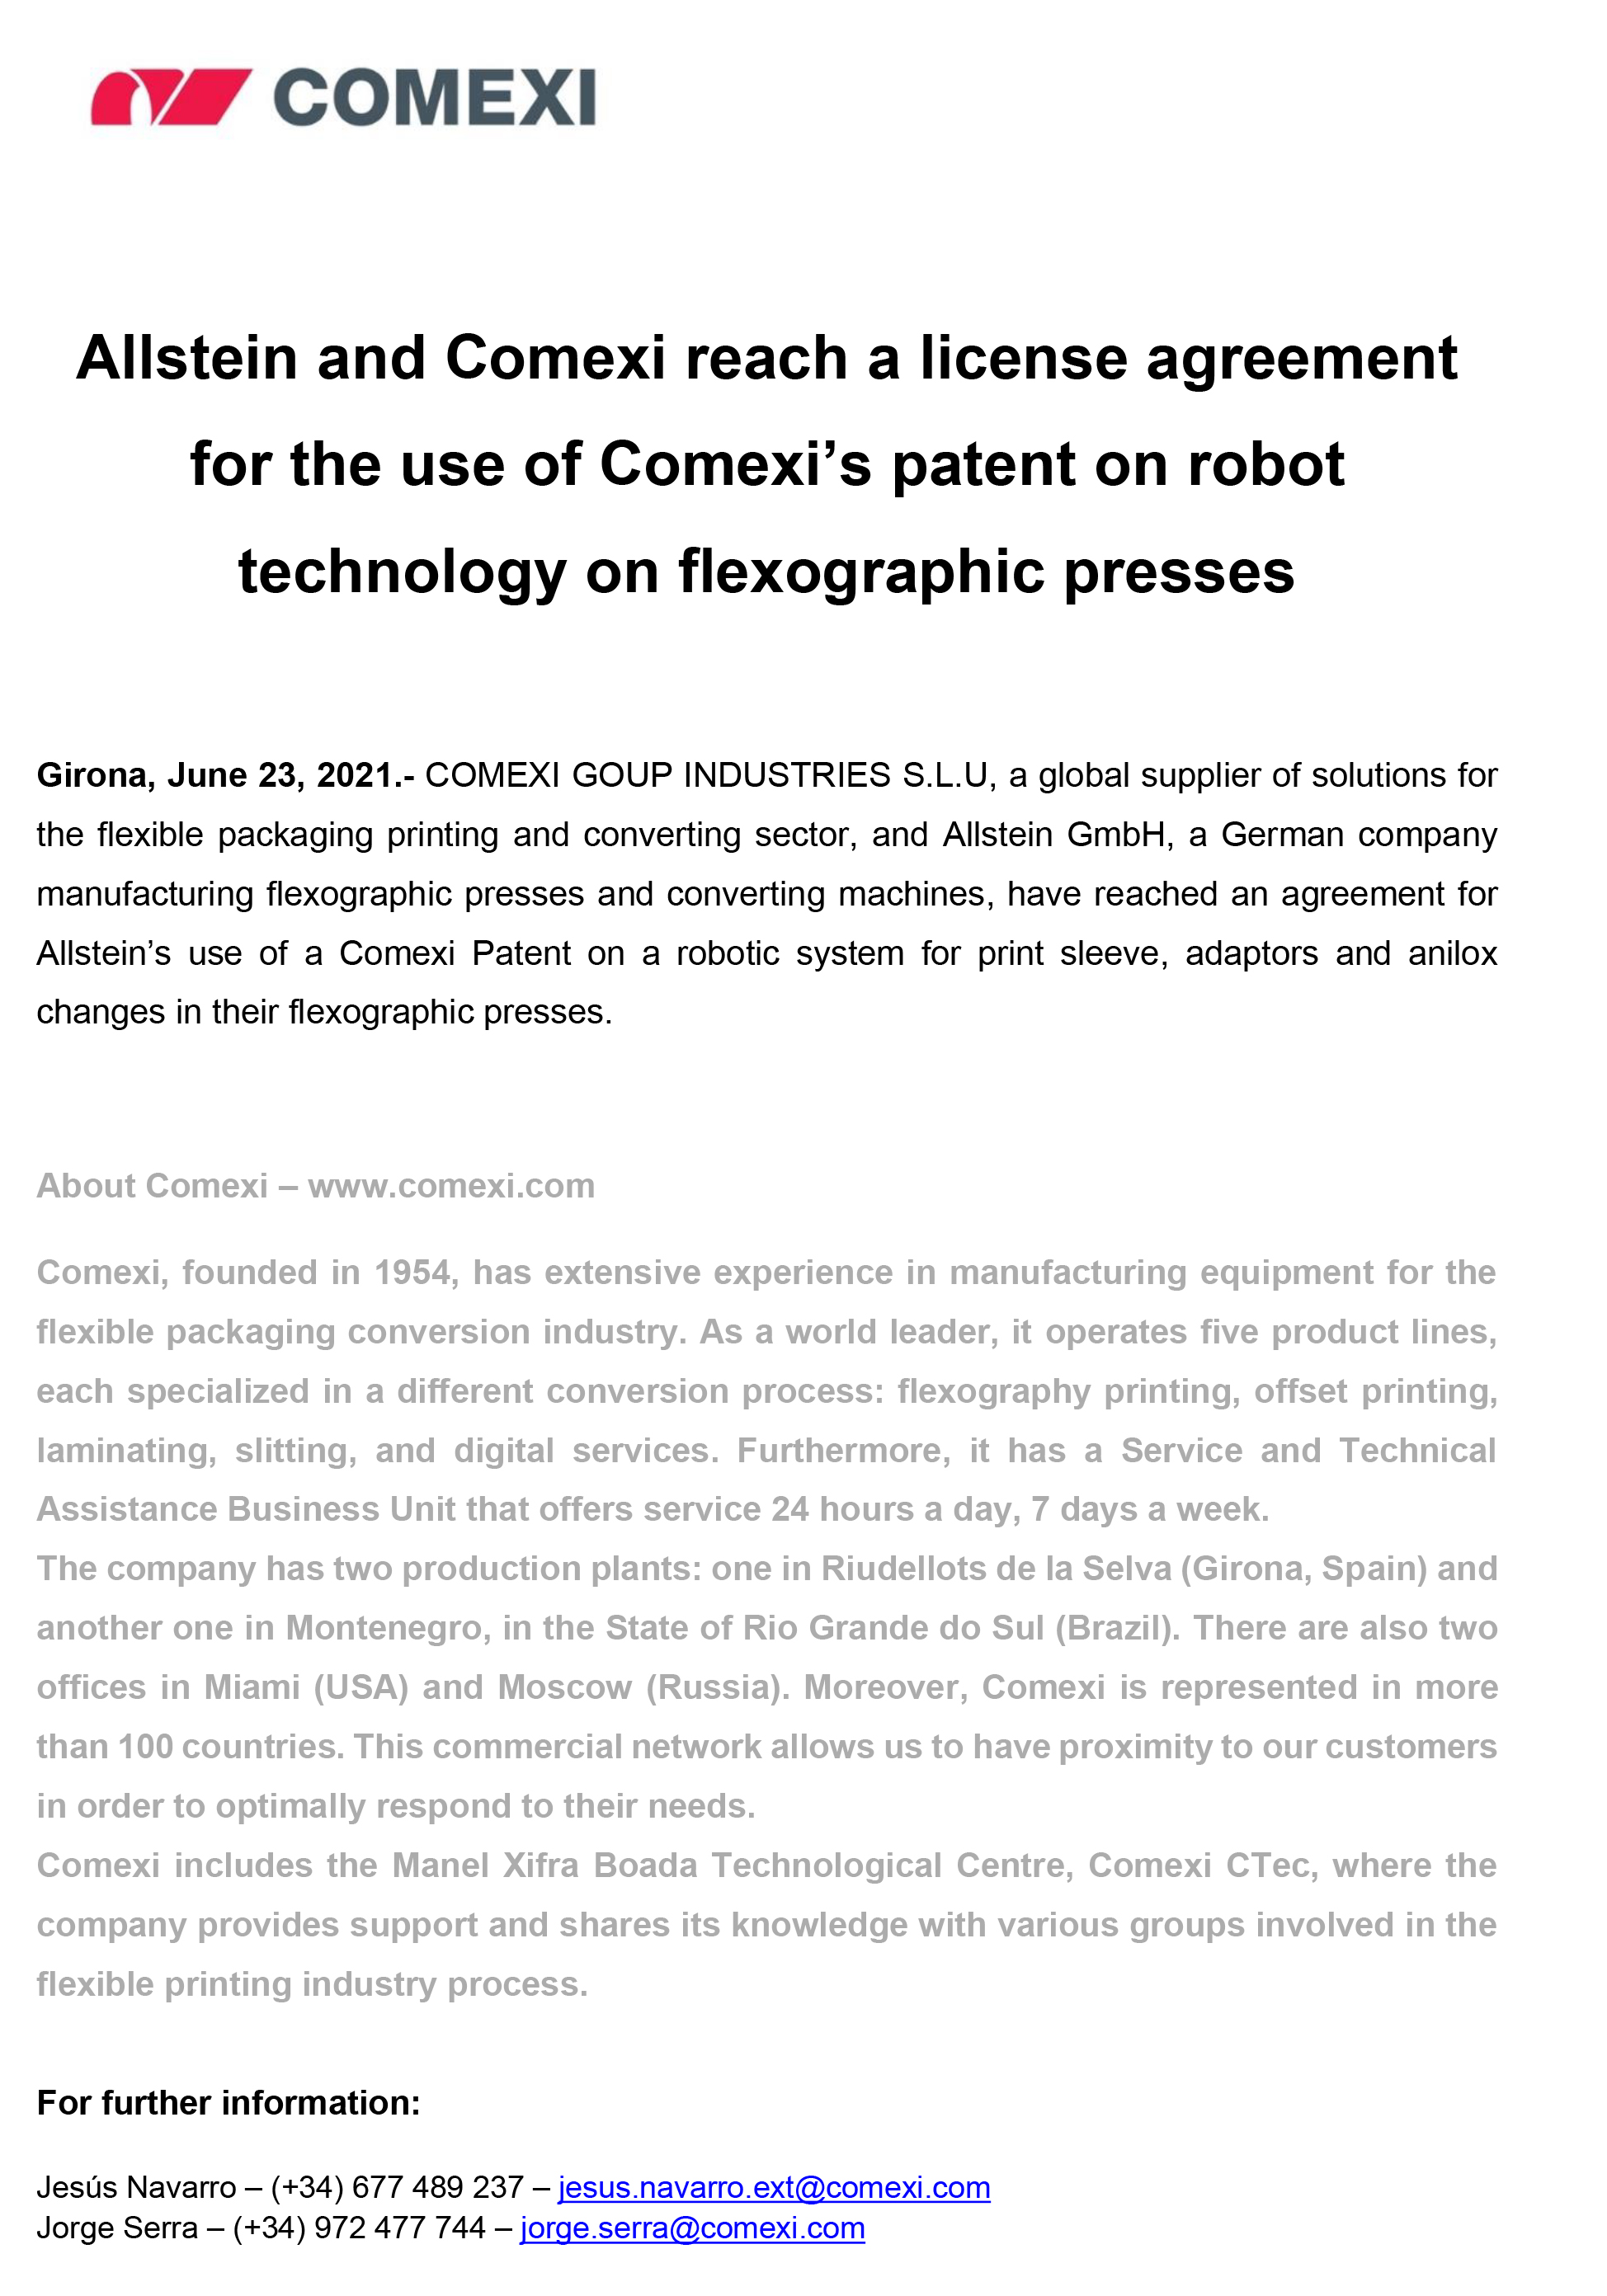 Allstein and Comexi reach a license agreement for the use of Comexi’s patent on robot technology on flexographic presses